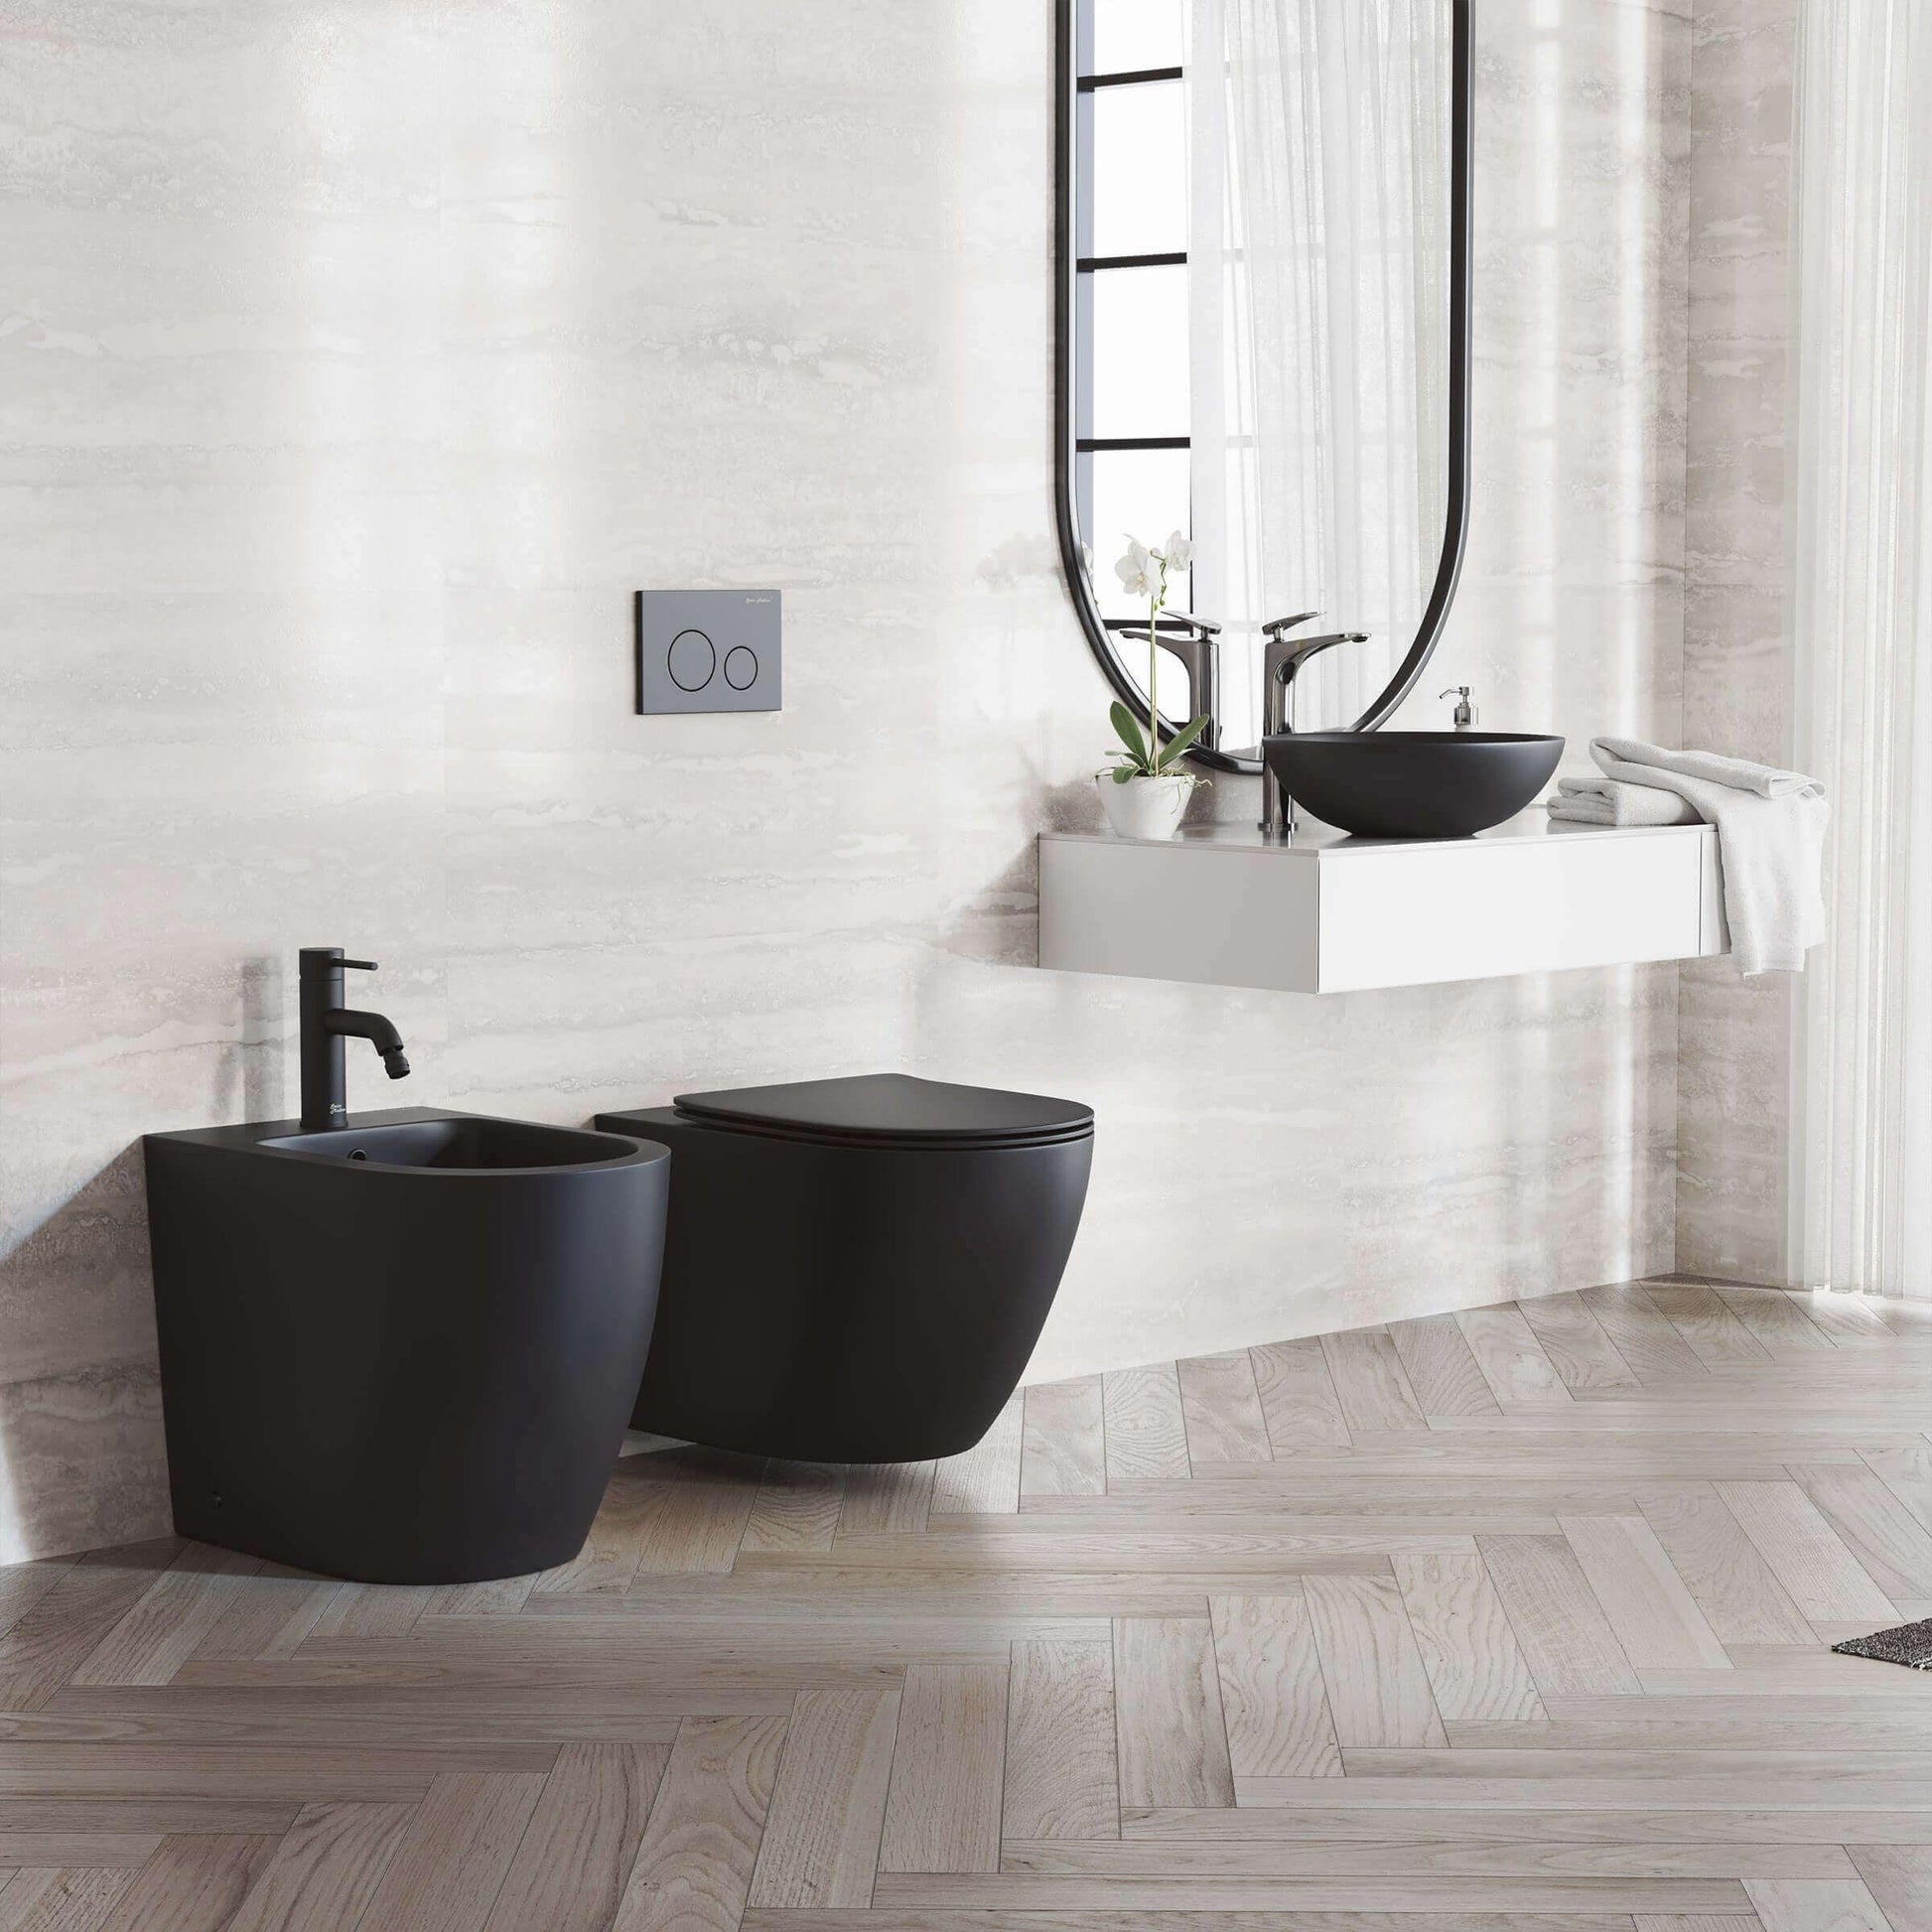 St. Tropez Bidet - side angled view in a bathroom in color black